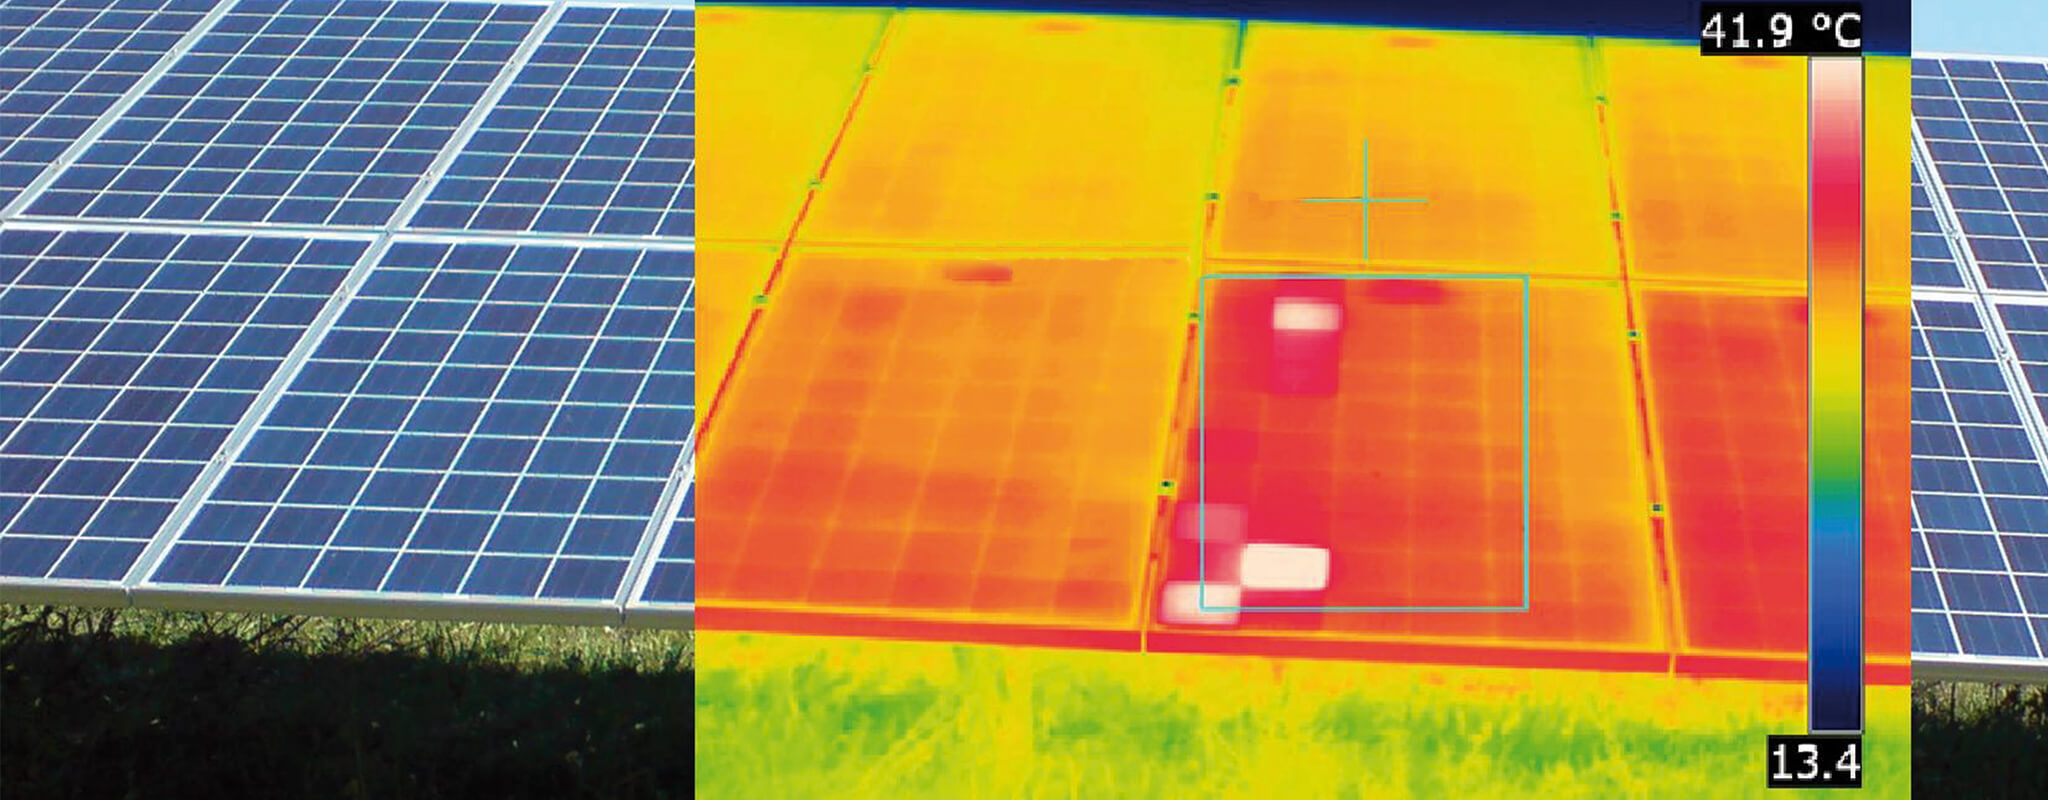 Thermography of a PV power plant